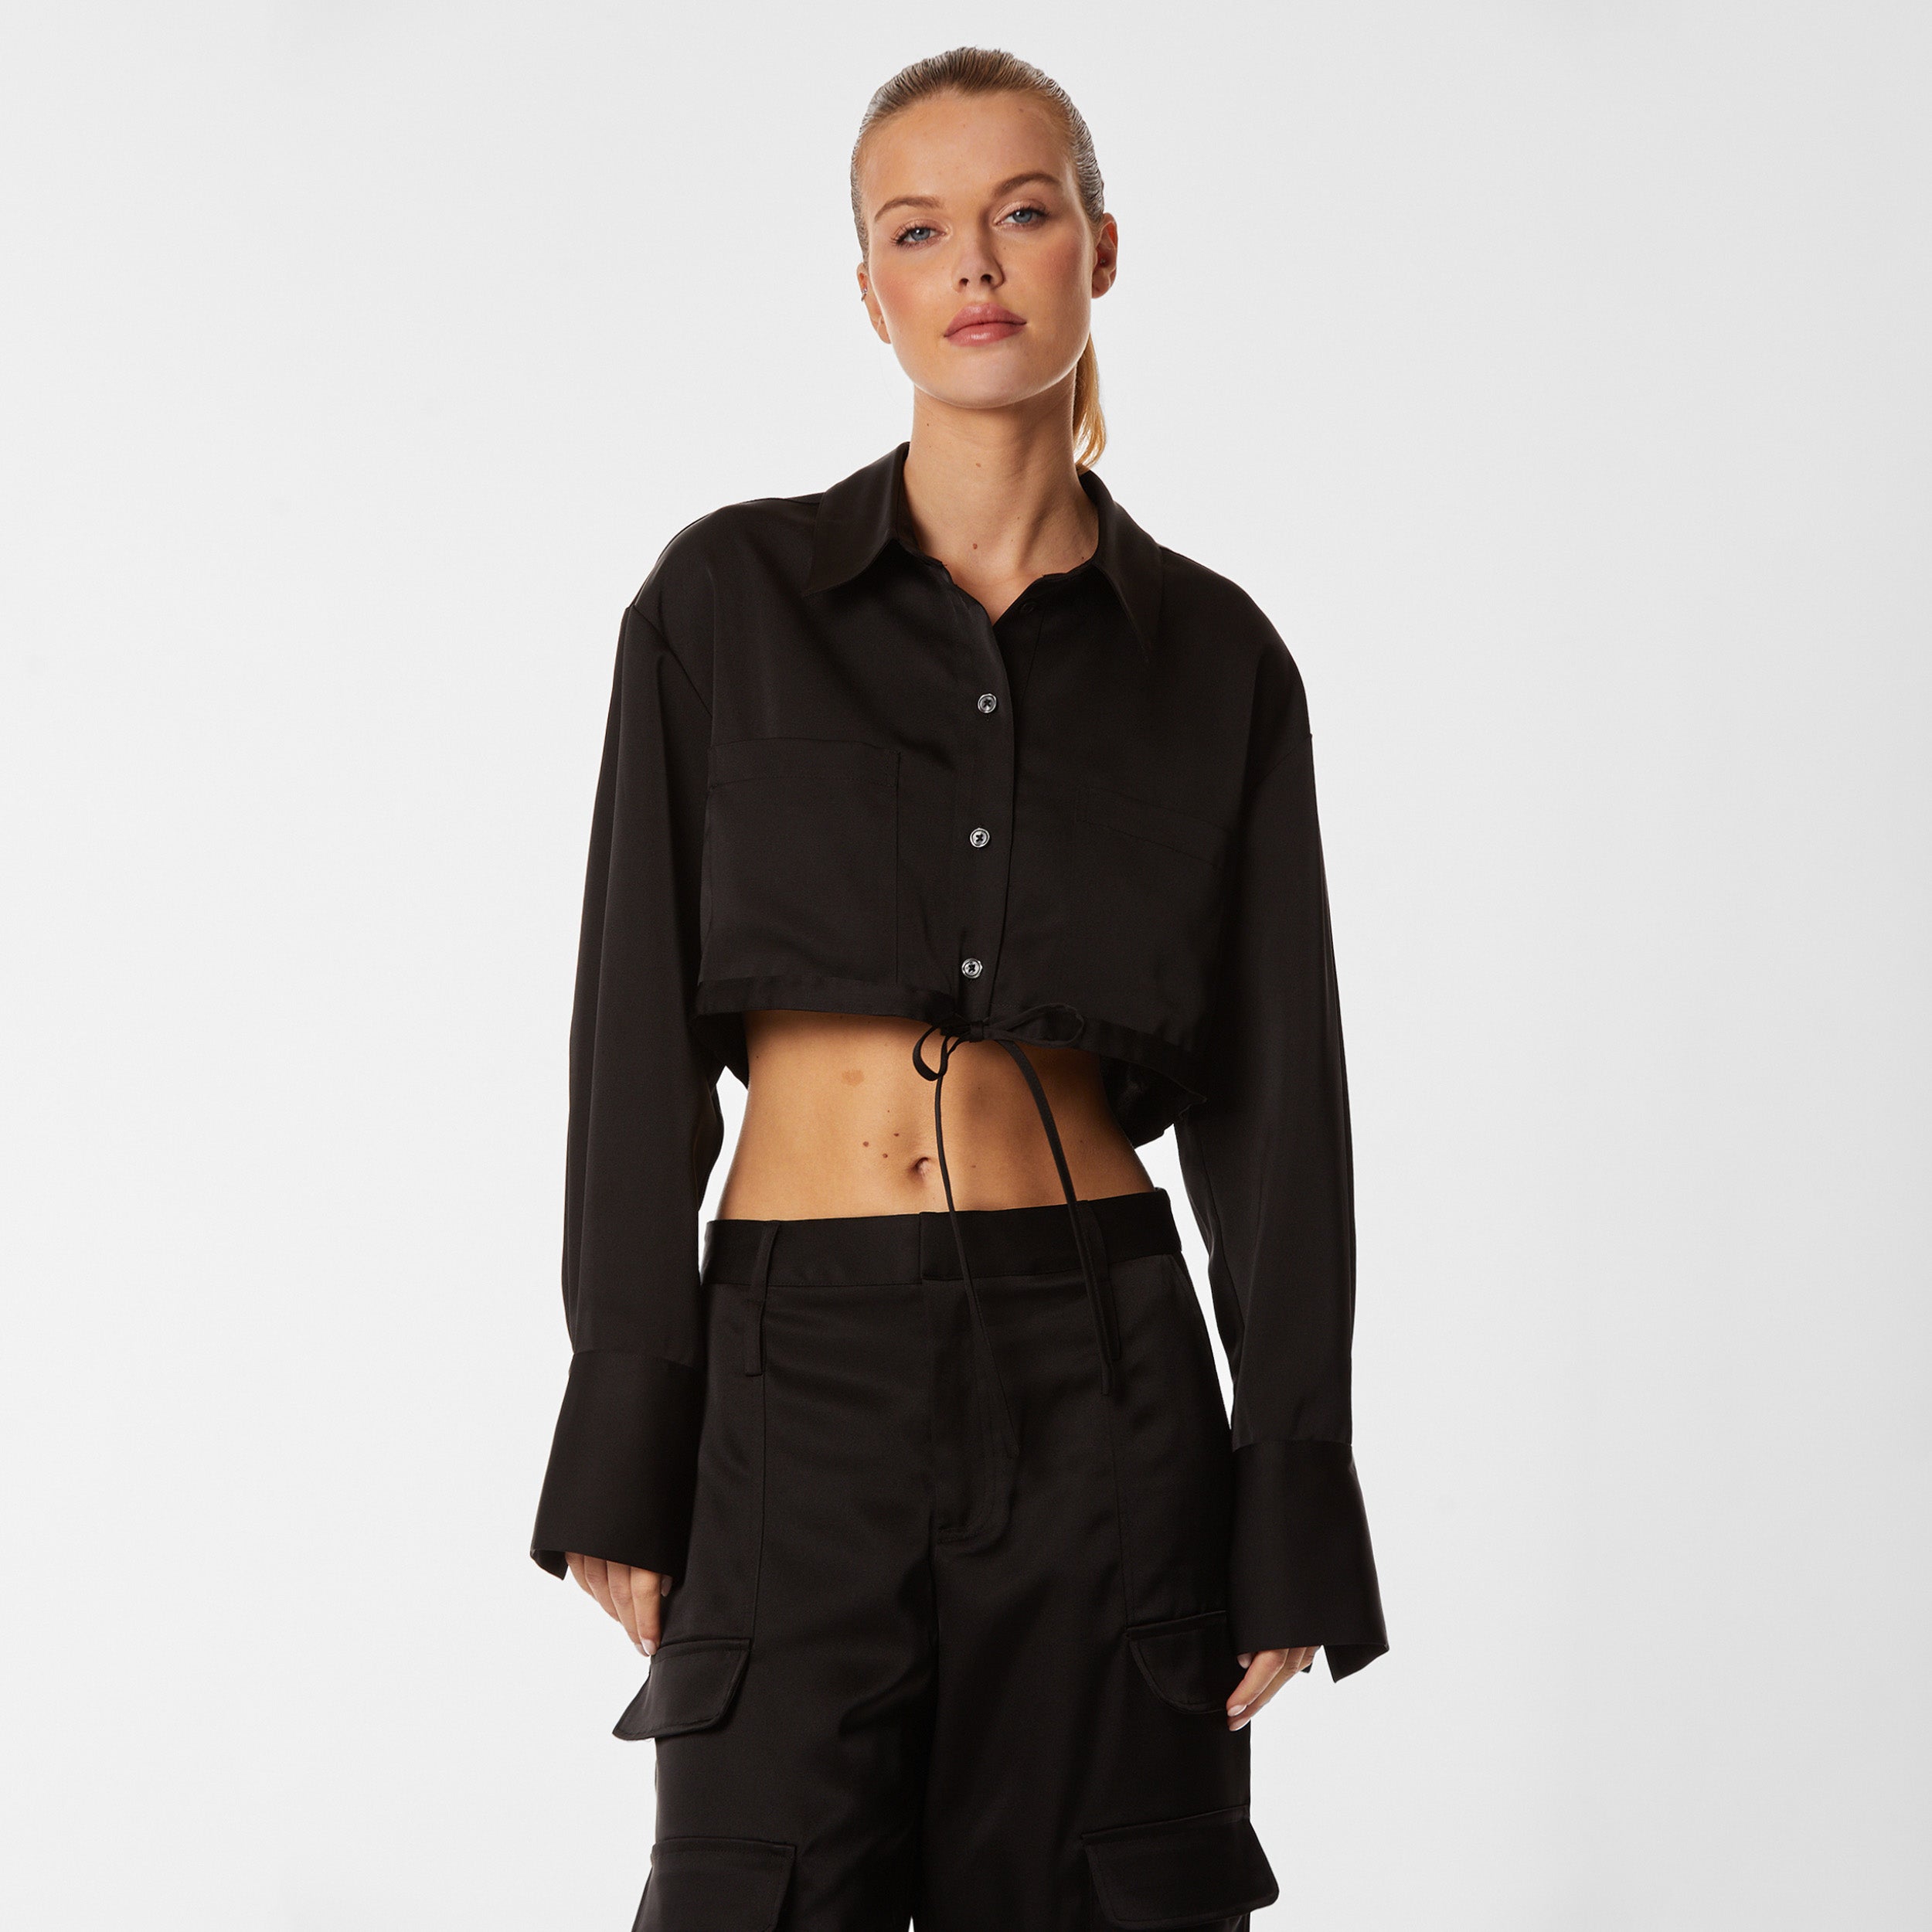 Front view of woman wearing black Milan Satin Button Up features luxurious and structured satin-like fabric, featuring cargo detailing, shell buttons and a tie-waist